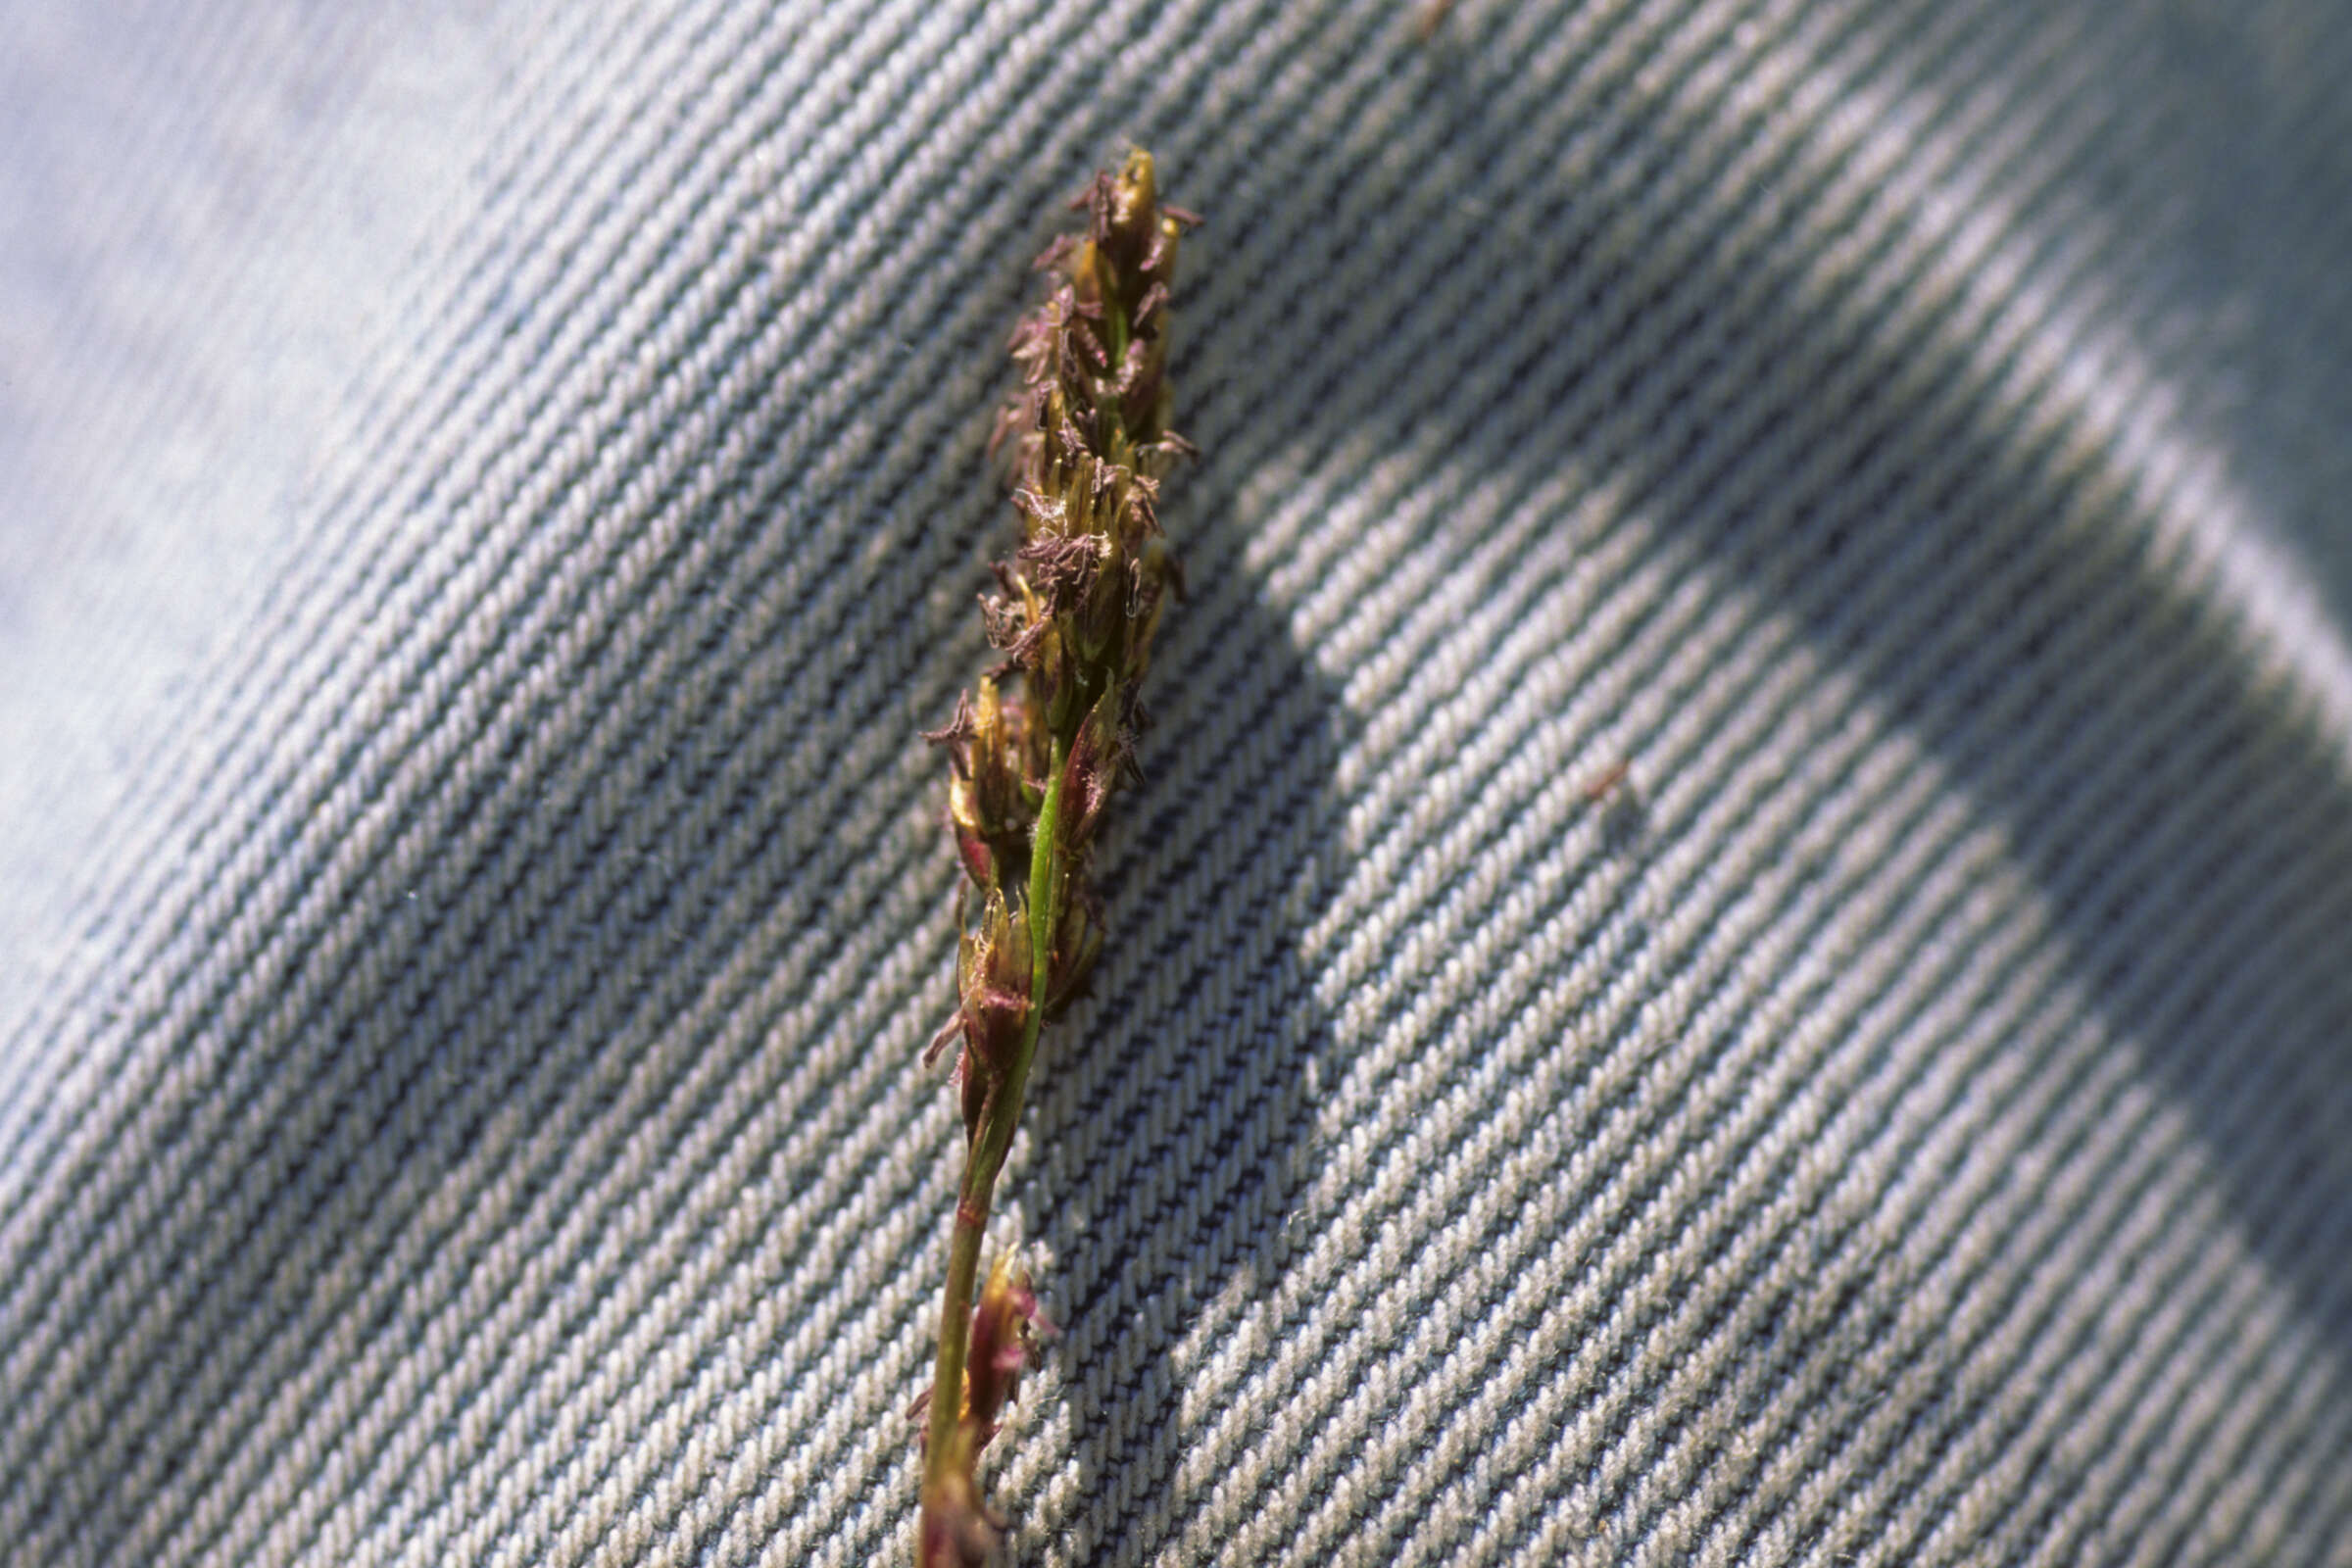 Image of tundragrass